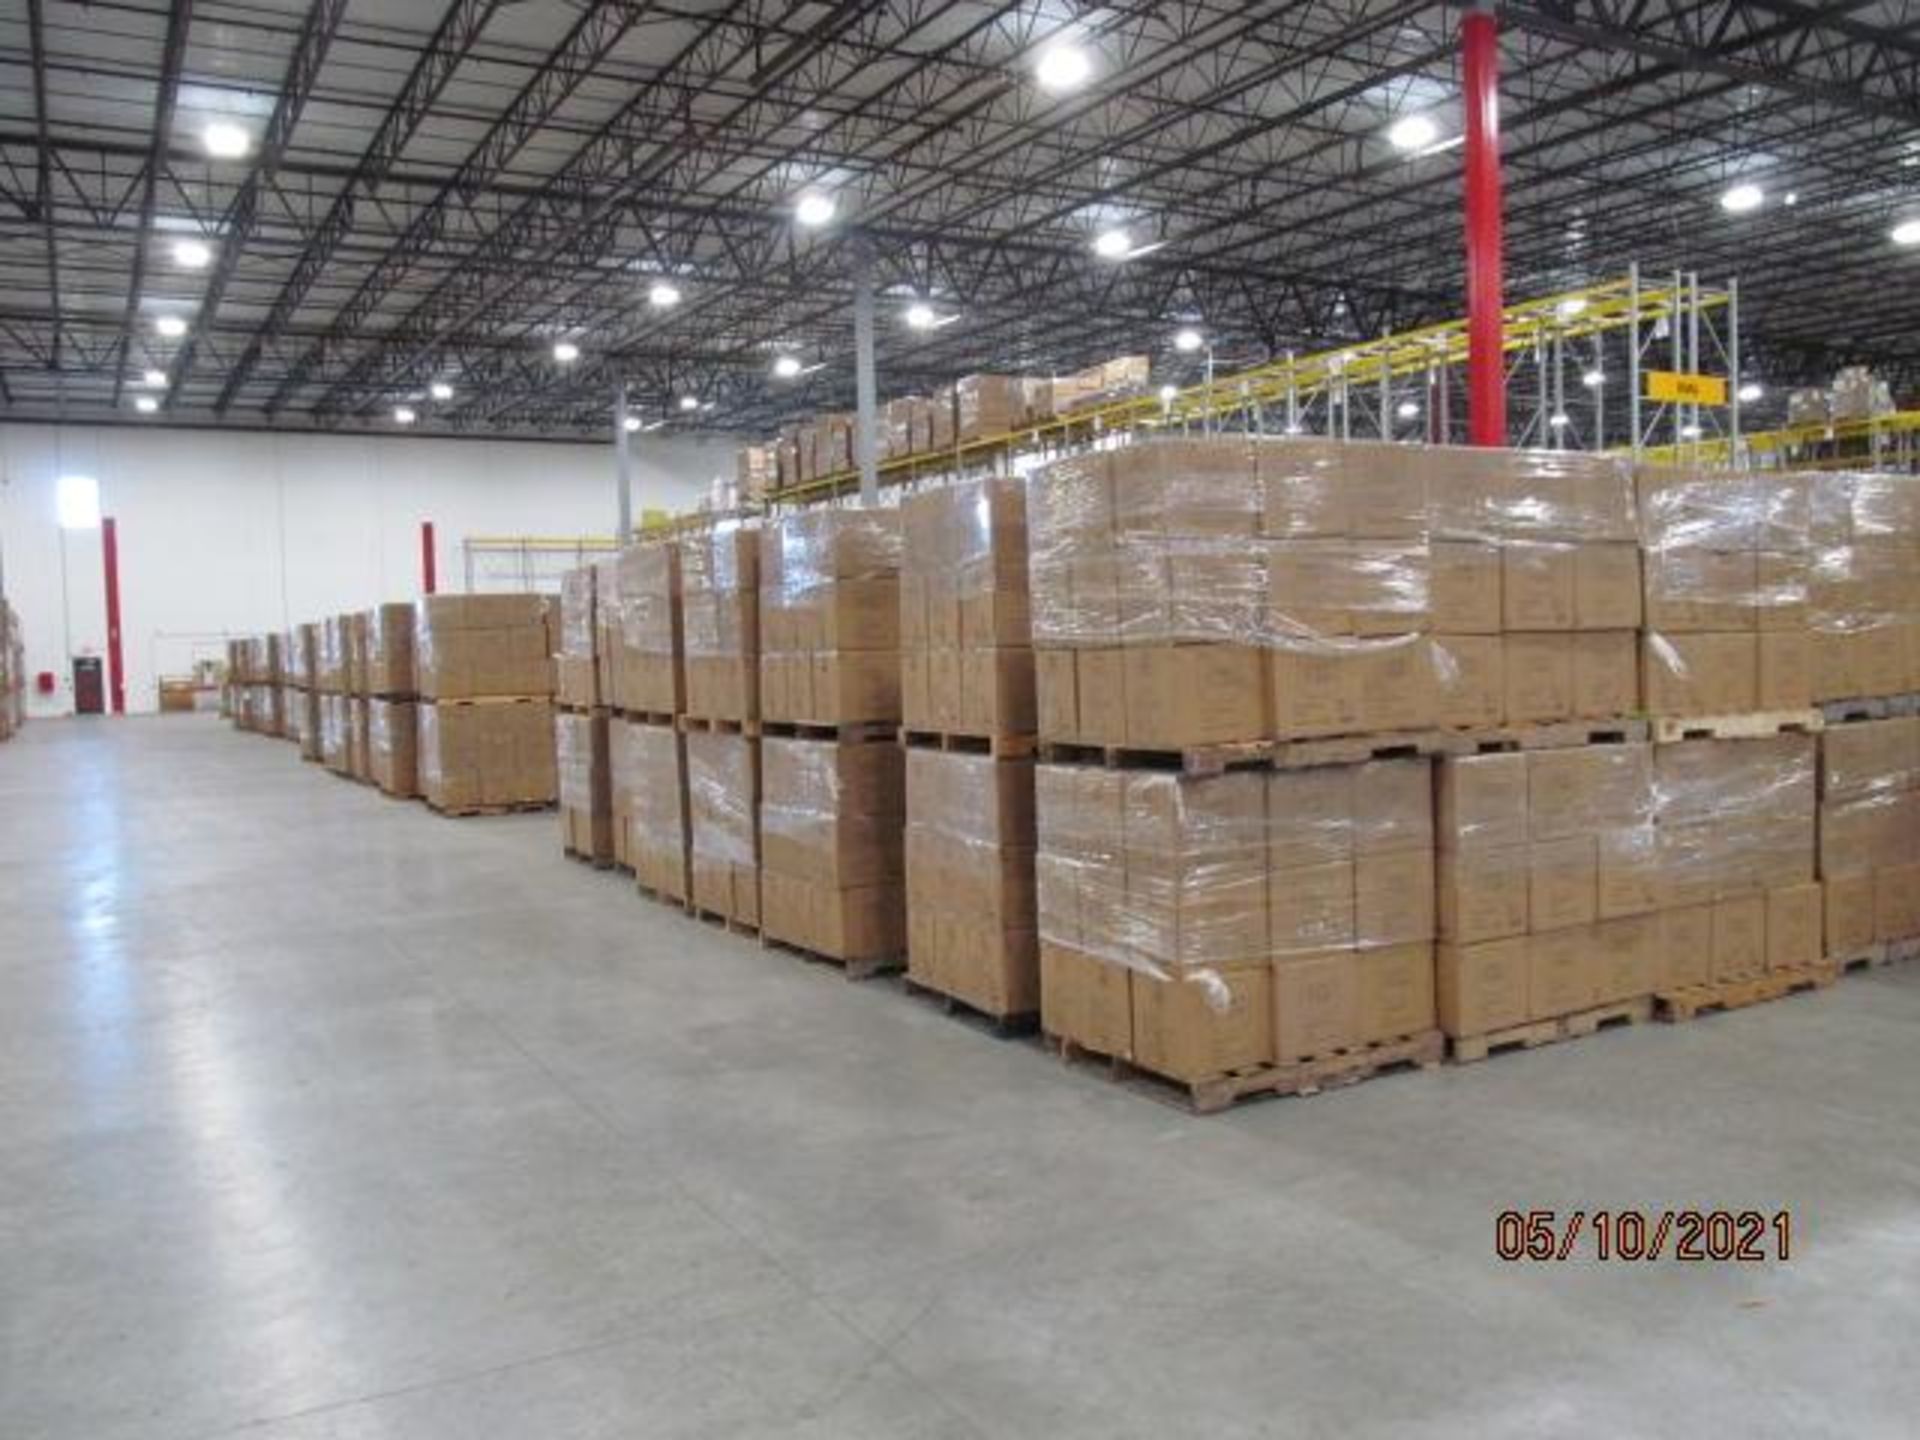 Lot of Waxman Kleen Freak Sanitizing Wipes consisting of 29,027 packages on 45 pallets. Each package - Image 10 of 11